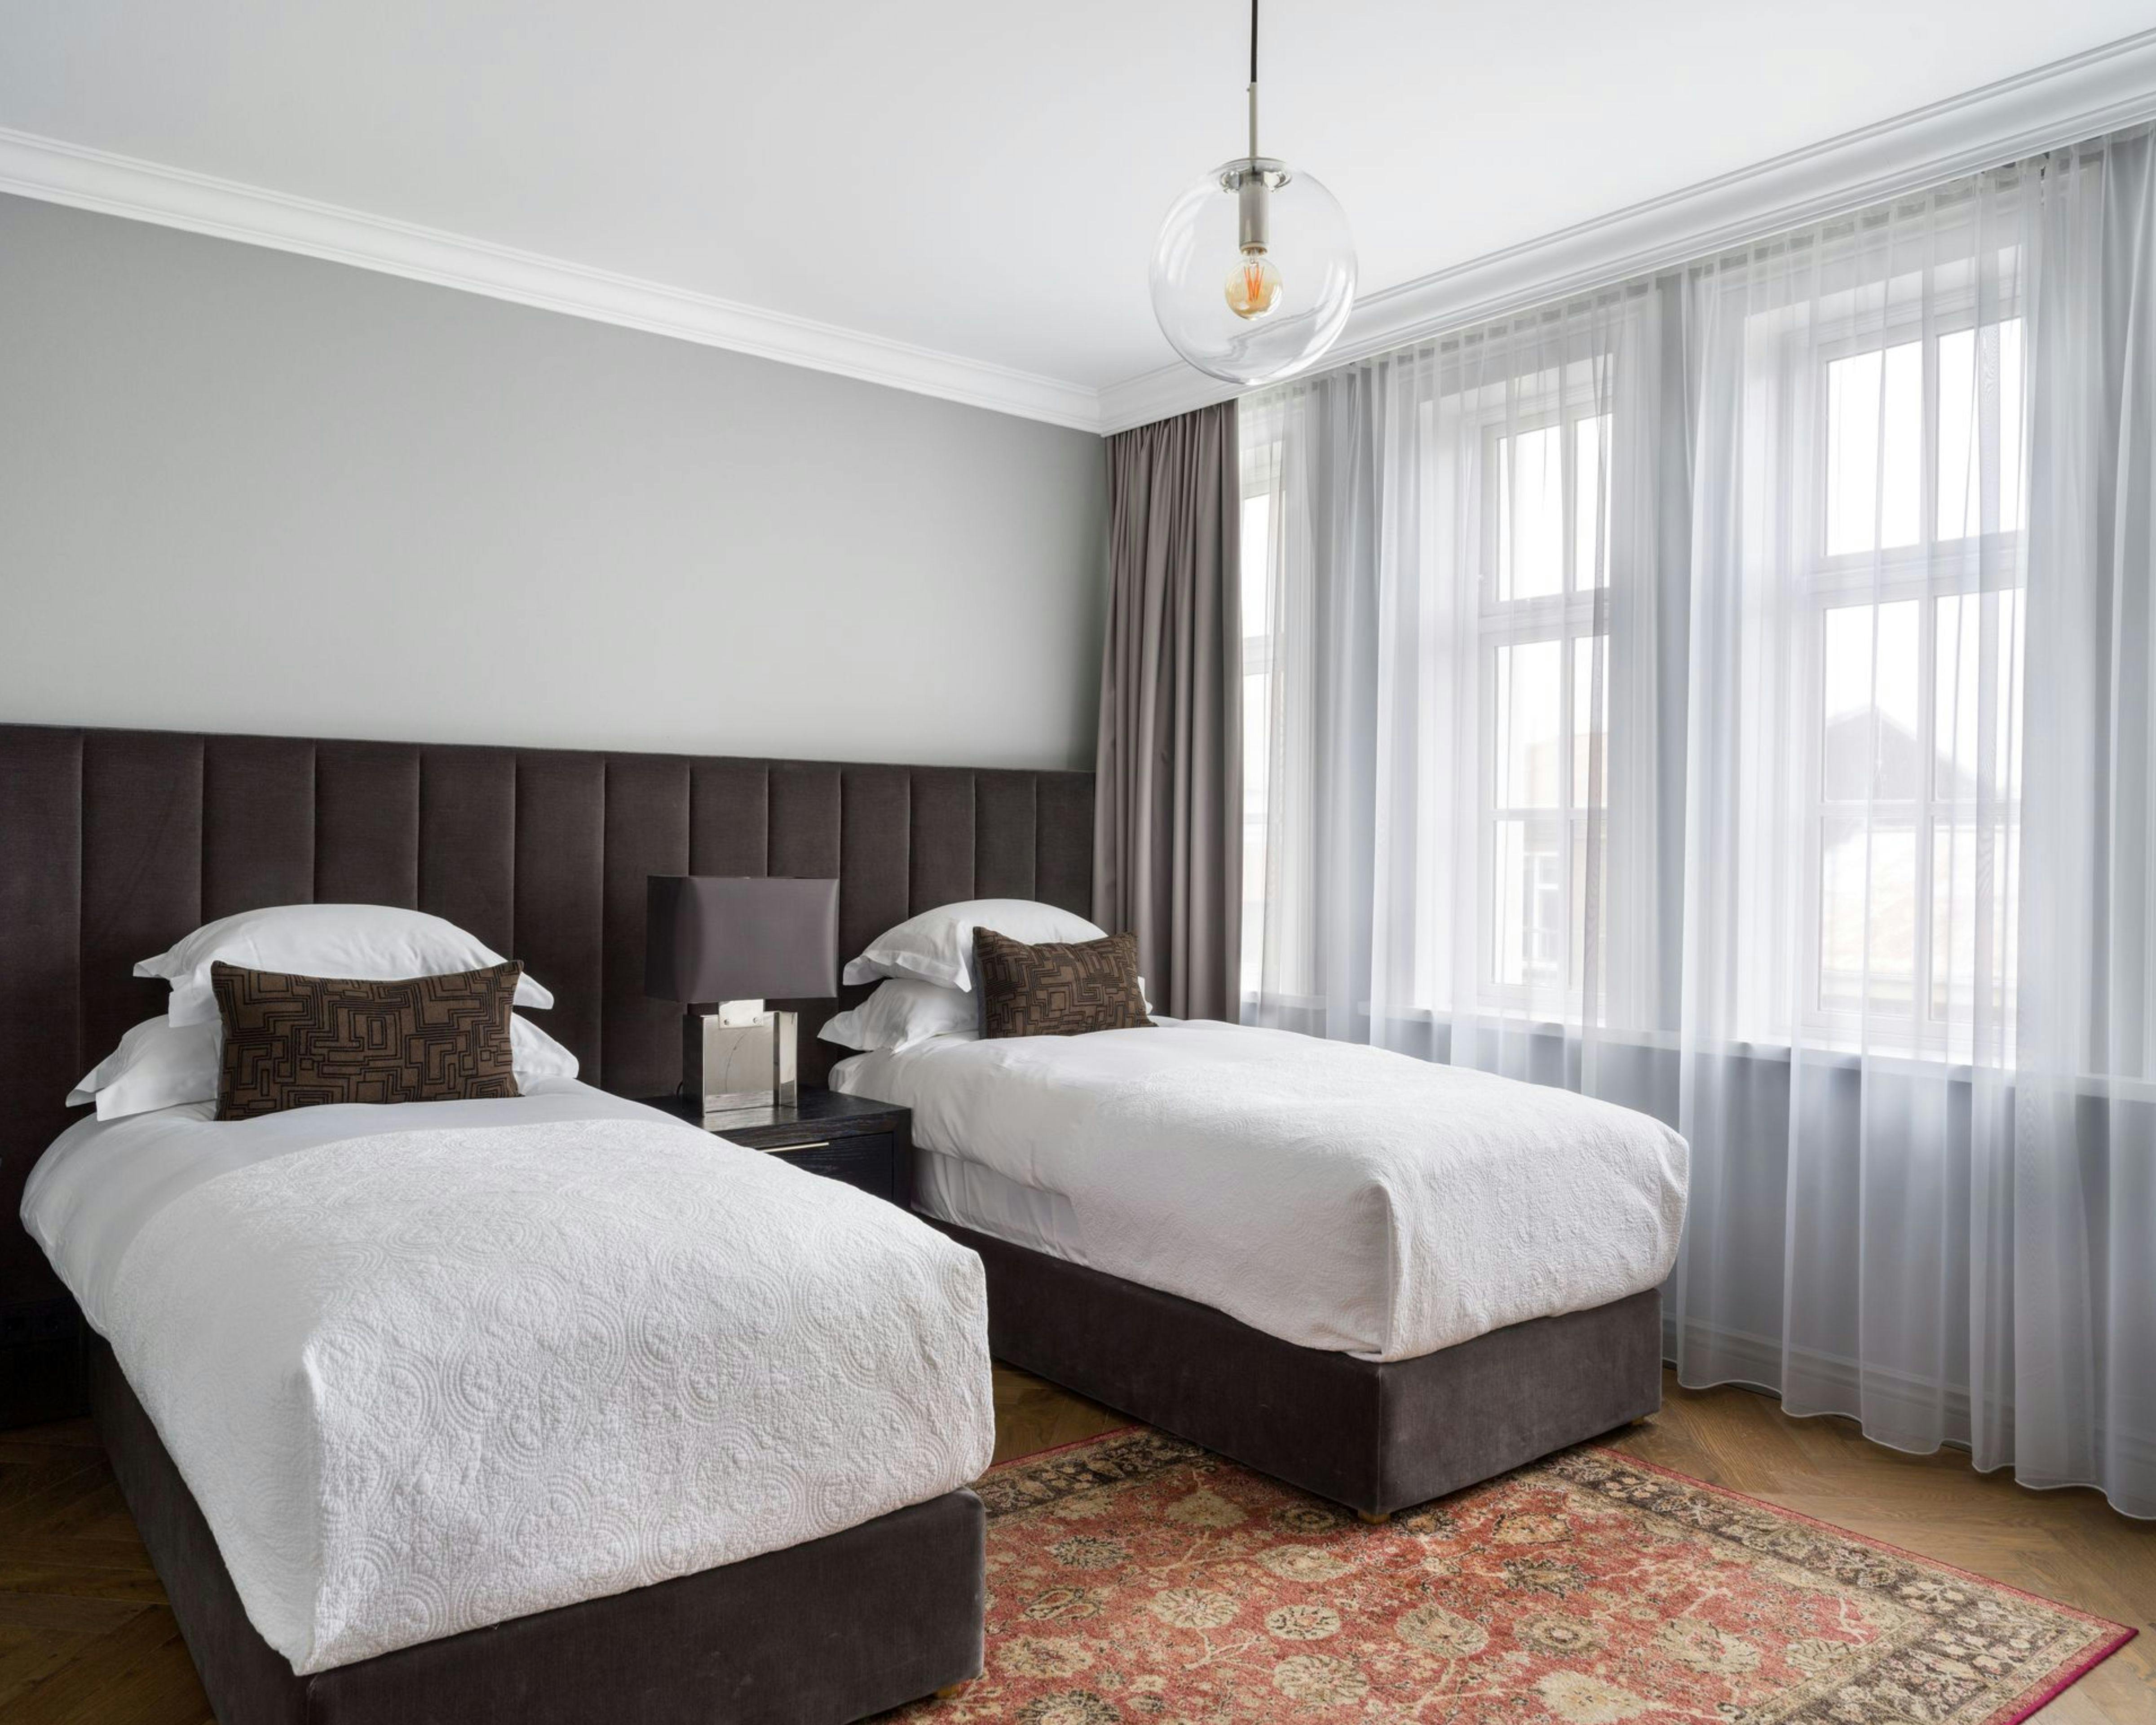 Sand Hotel – A luxury boutique hotel in Iceland, Keahotels - Rooms